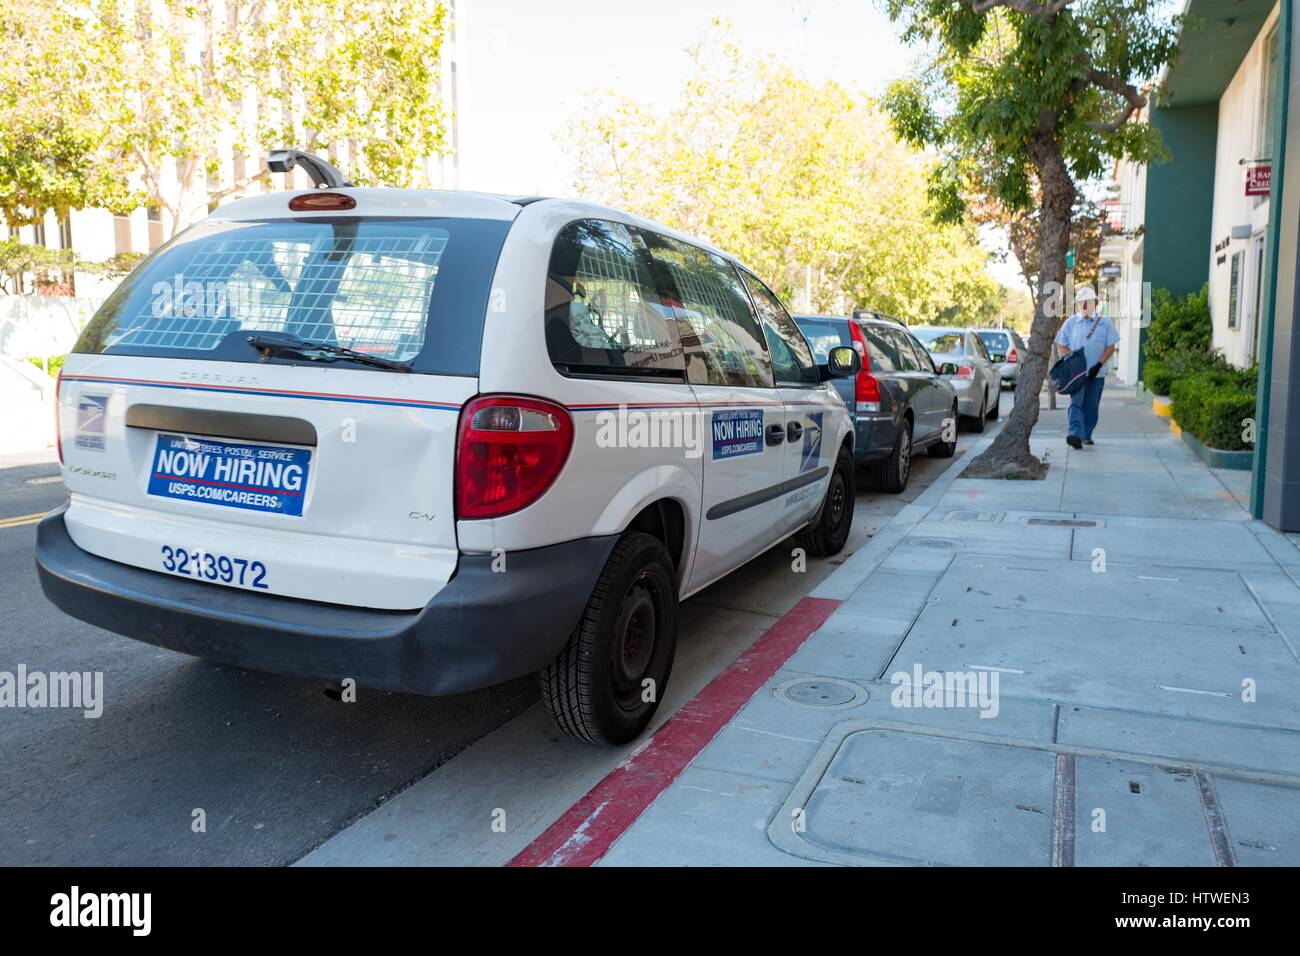 United States Postal Service vehicle with sign reading Now Hiring, and postal carrier walking towards the vehicle, in the Silicon Valley town of Palo Alto, California, August 25, 2016. Stock Photo